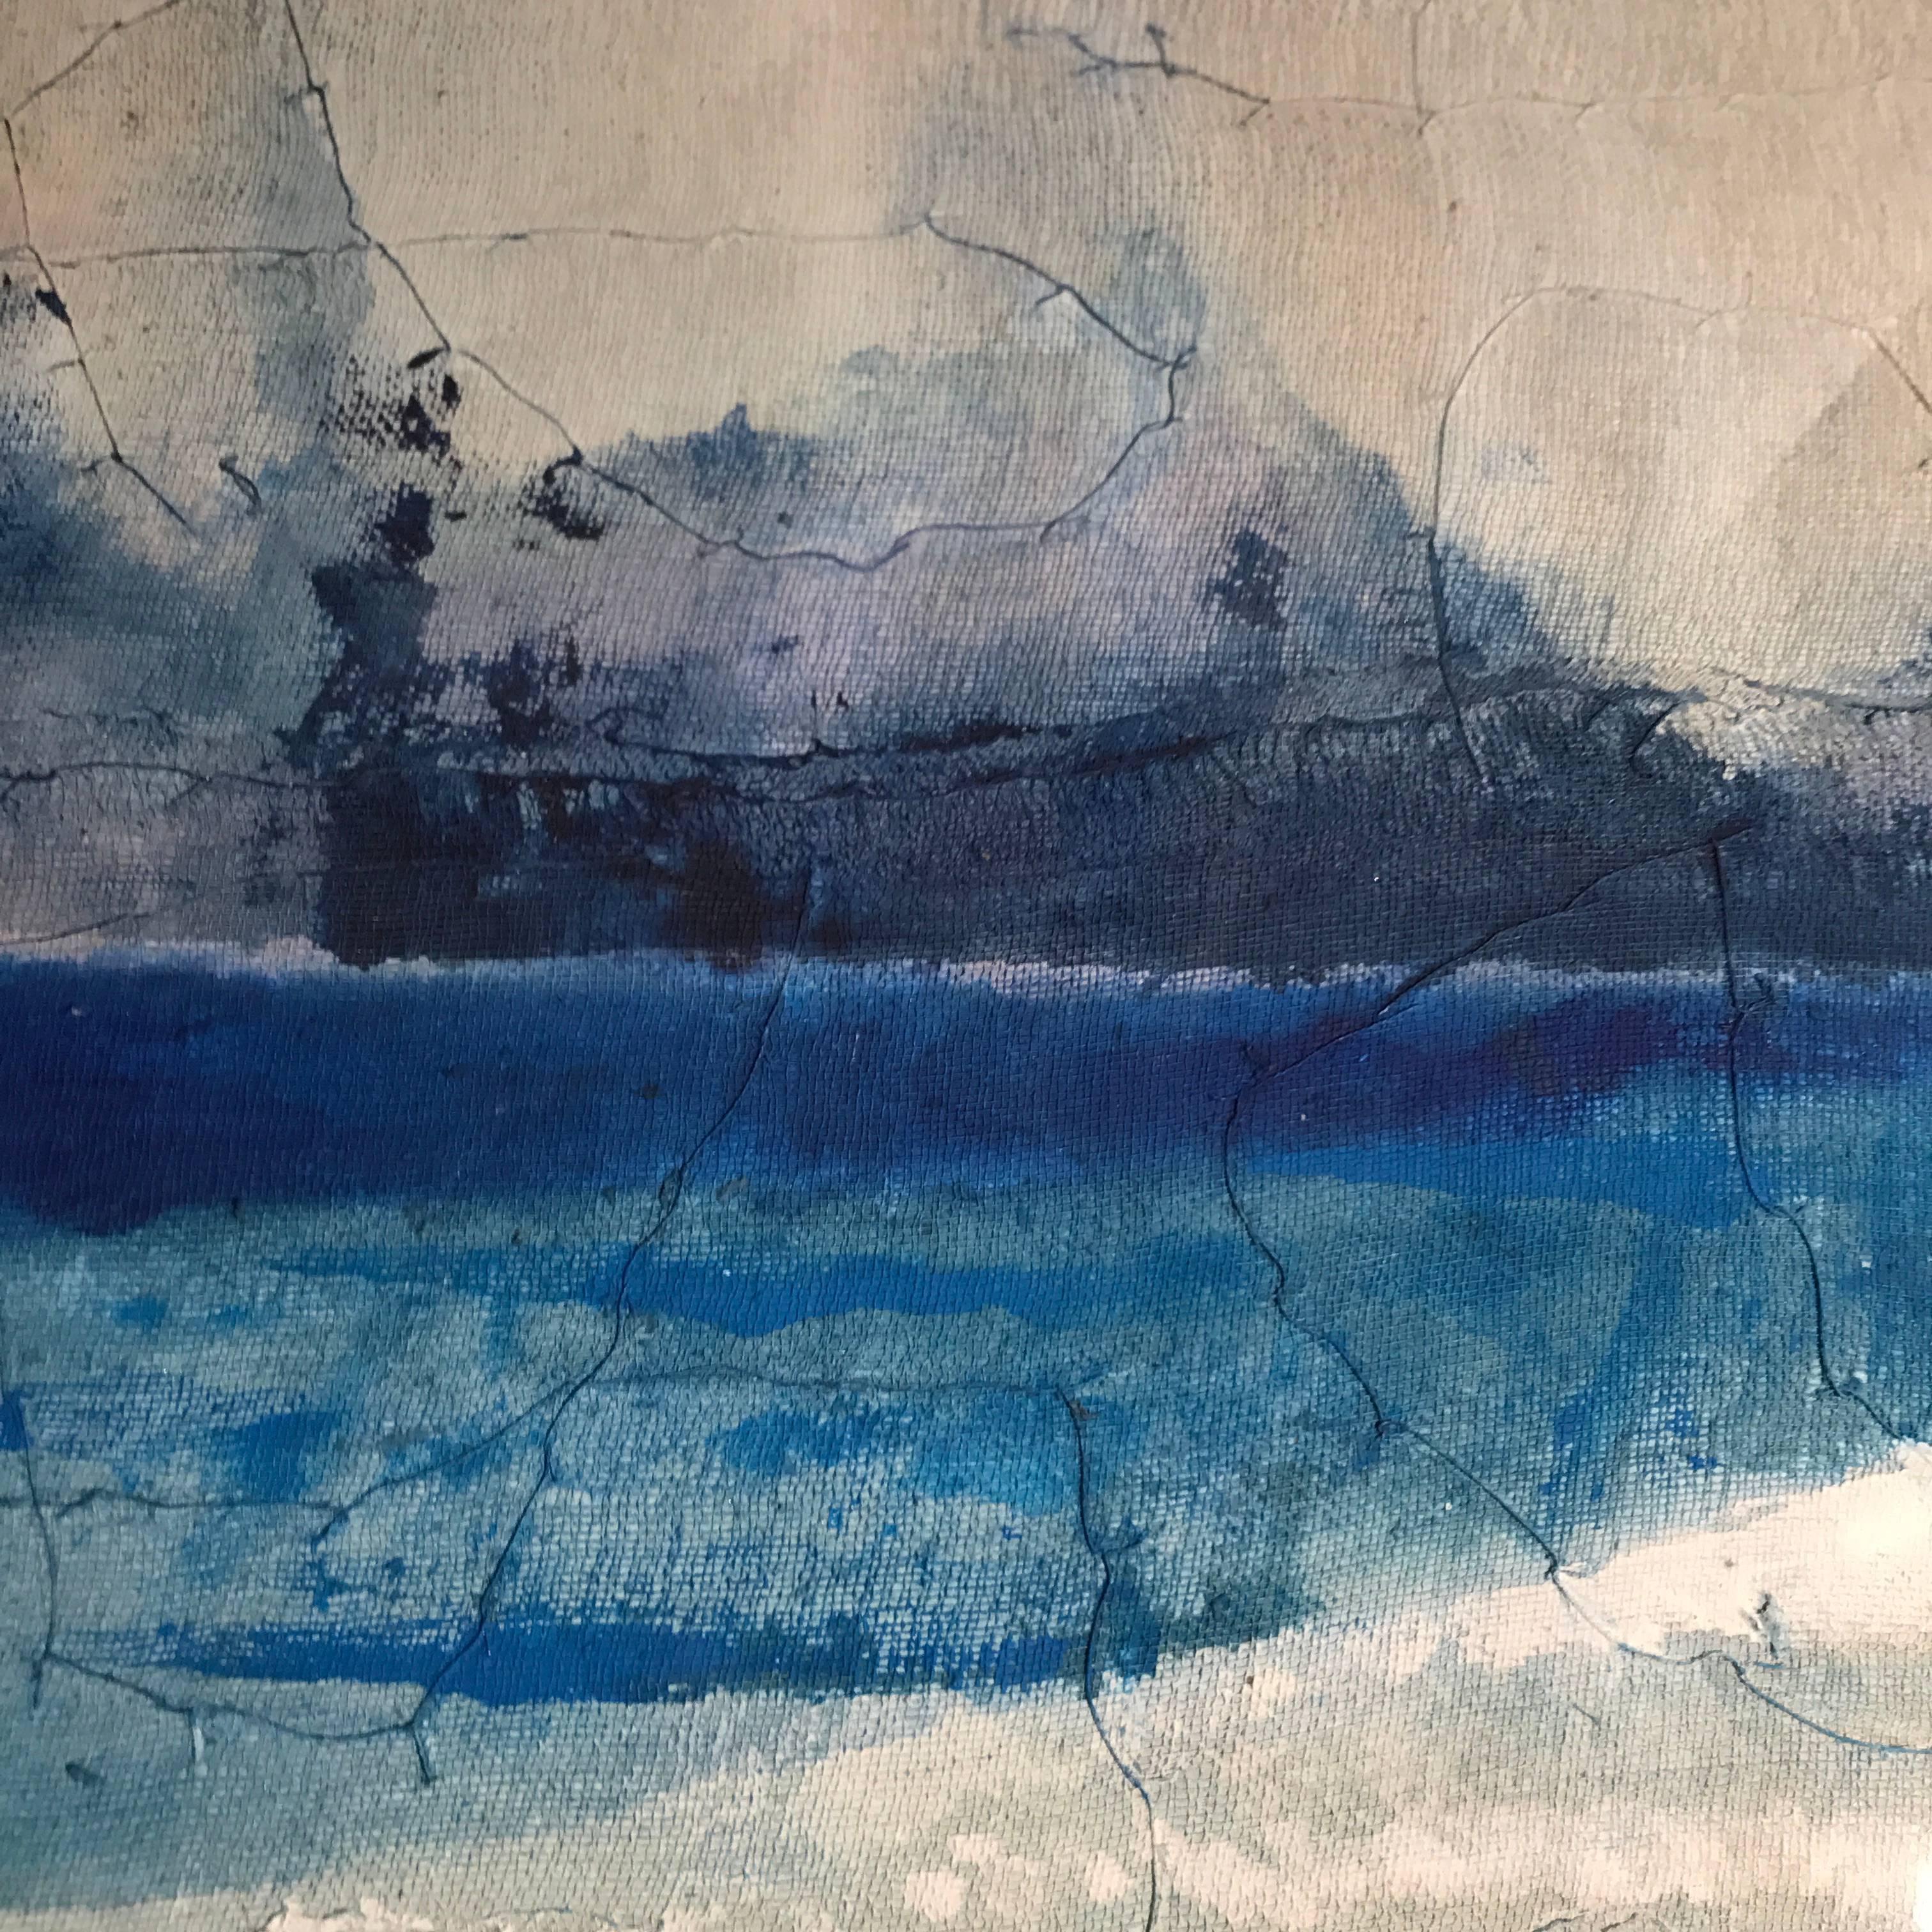 Contemporary abstract painting by Belgian artist Diane Petry.
The acrylic painting is horizontal shades of blue.
The artist creates her own three layer canvas using pima cotton, gauze and fine paper.
Raw edges and applied threads add